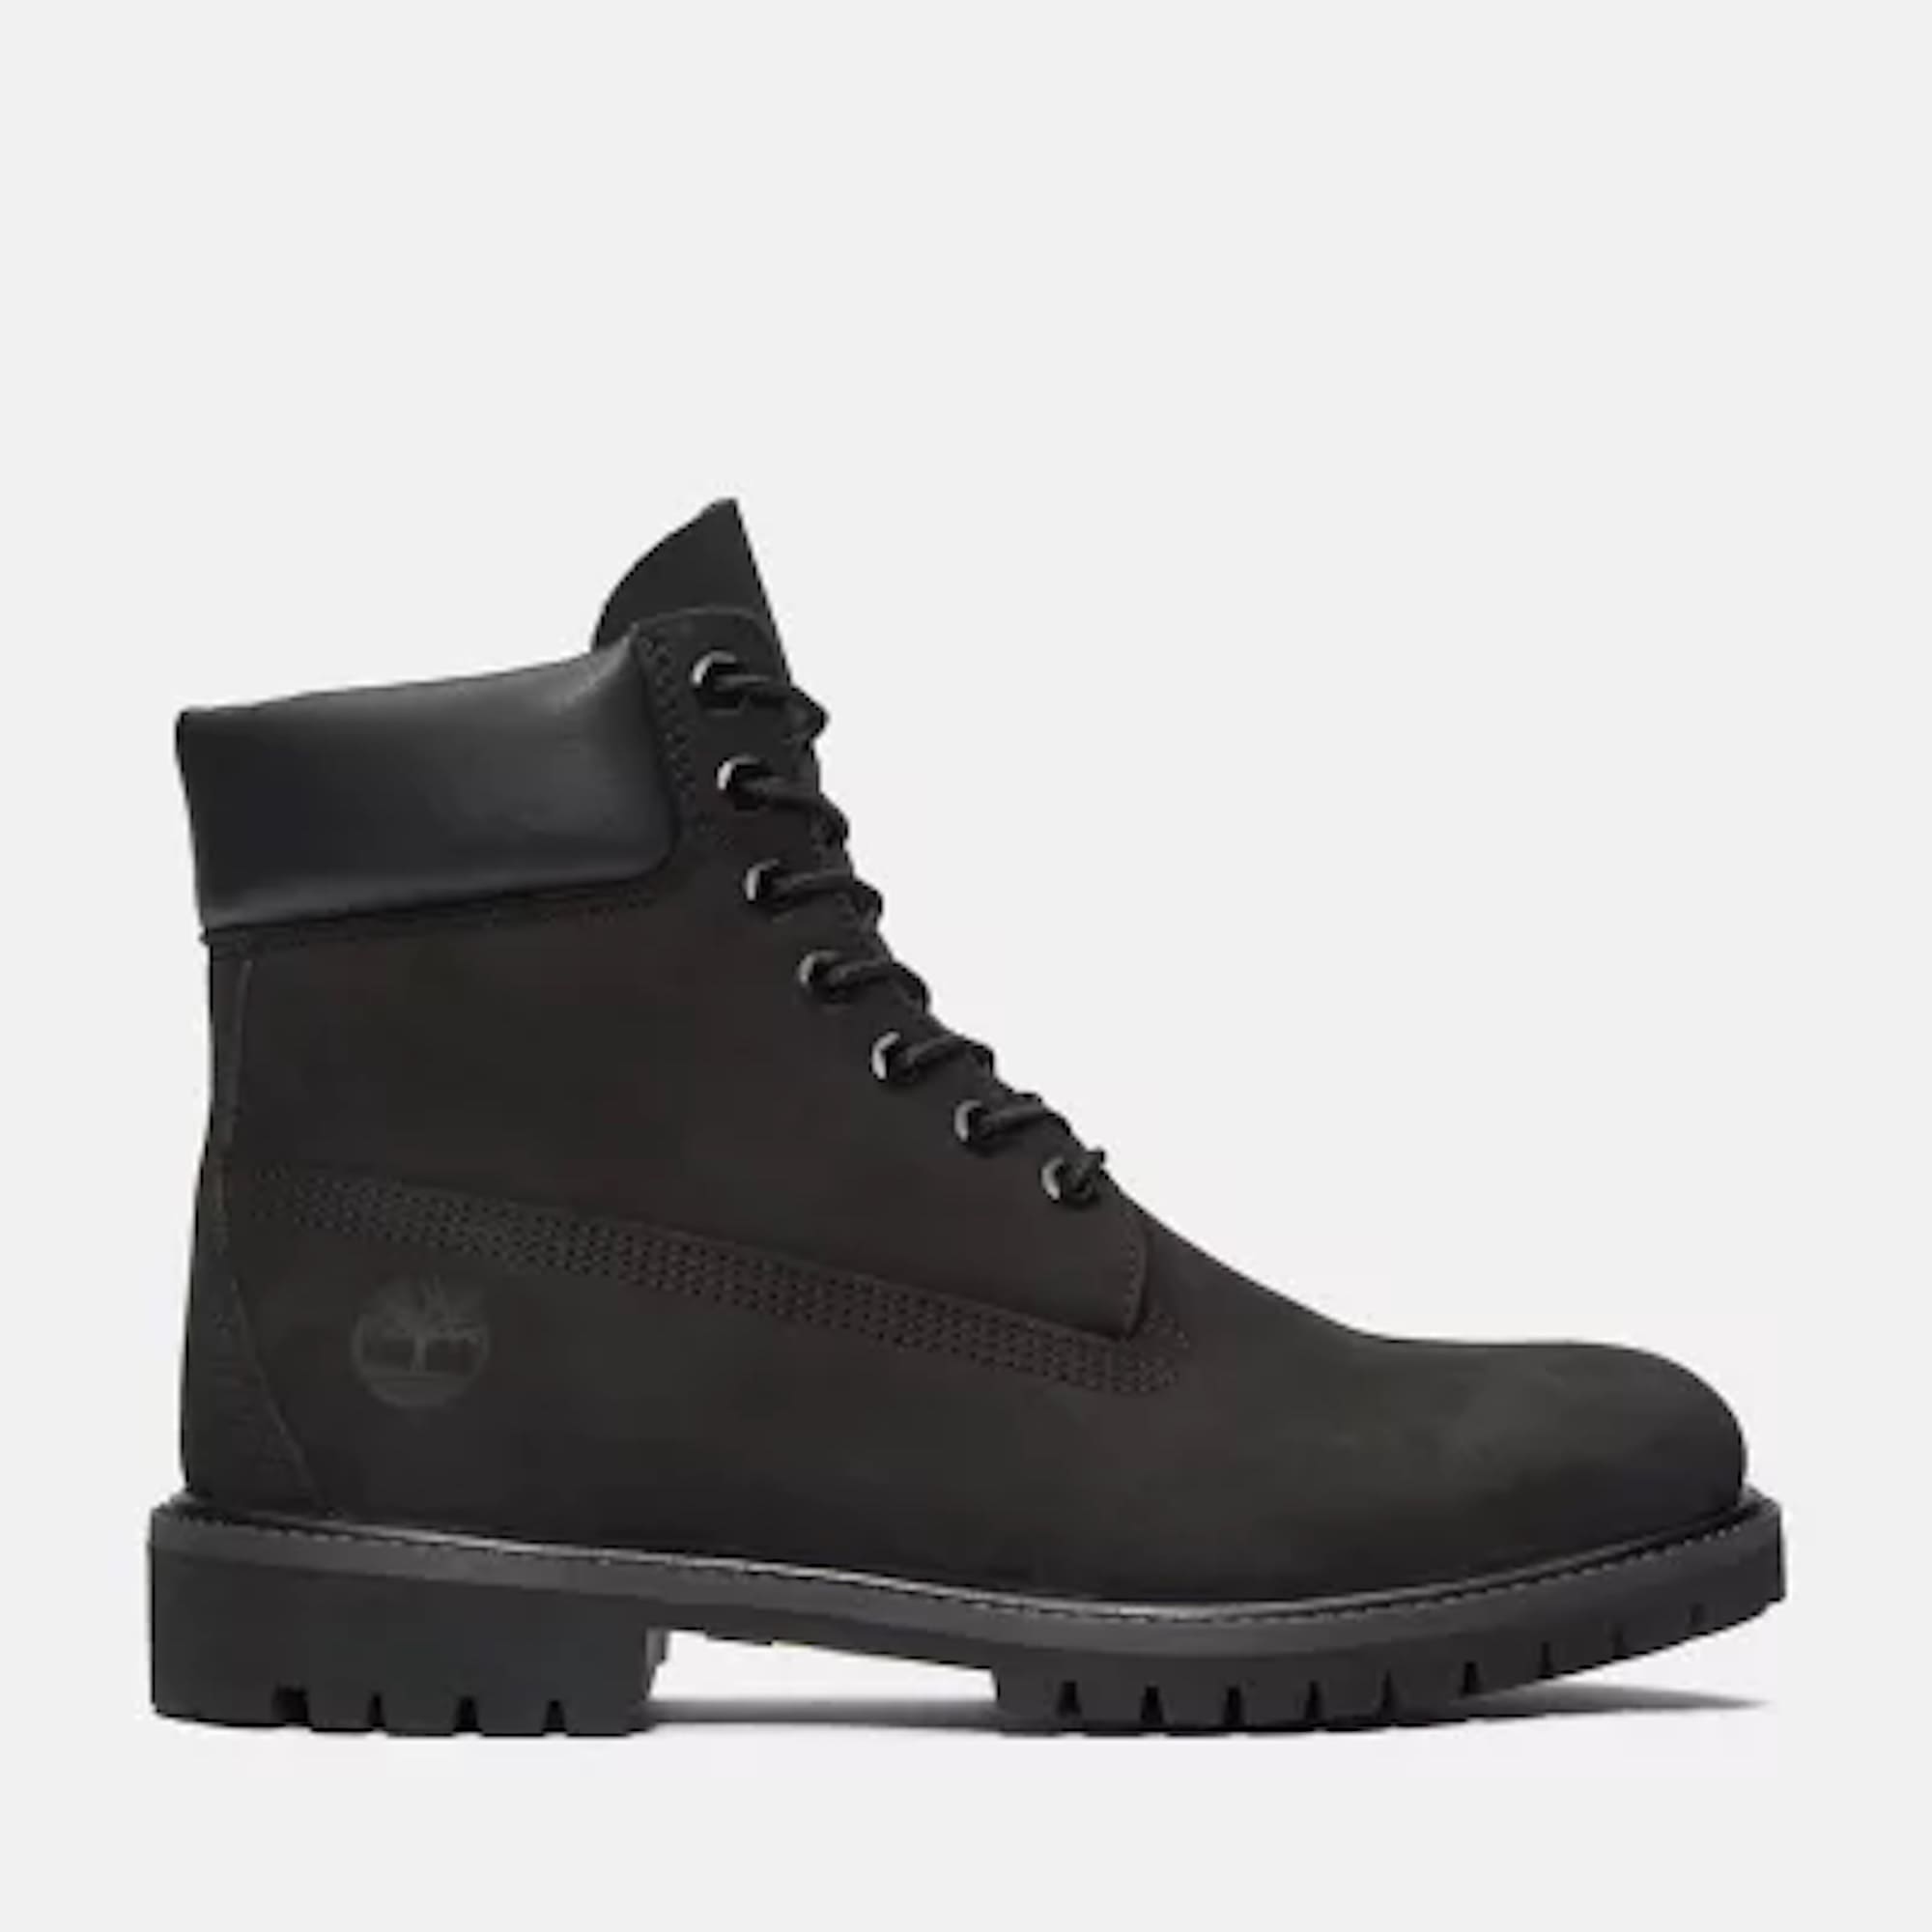 Timberland 6 Inch Field boots